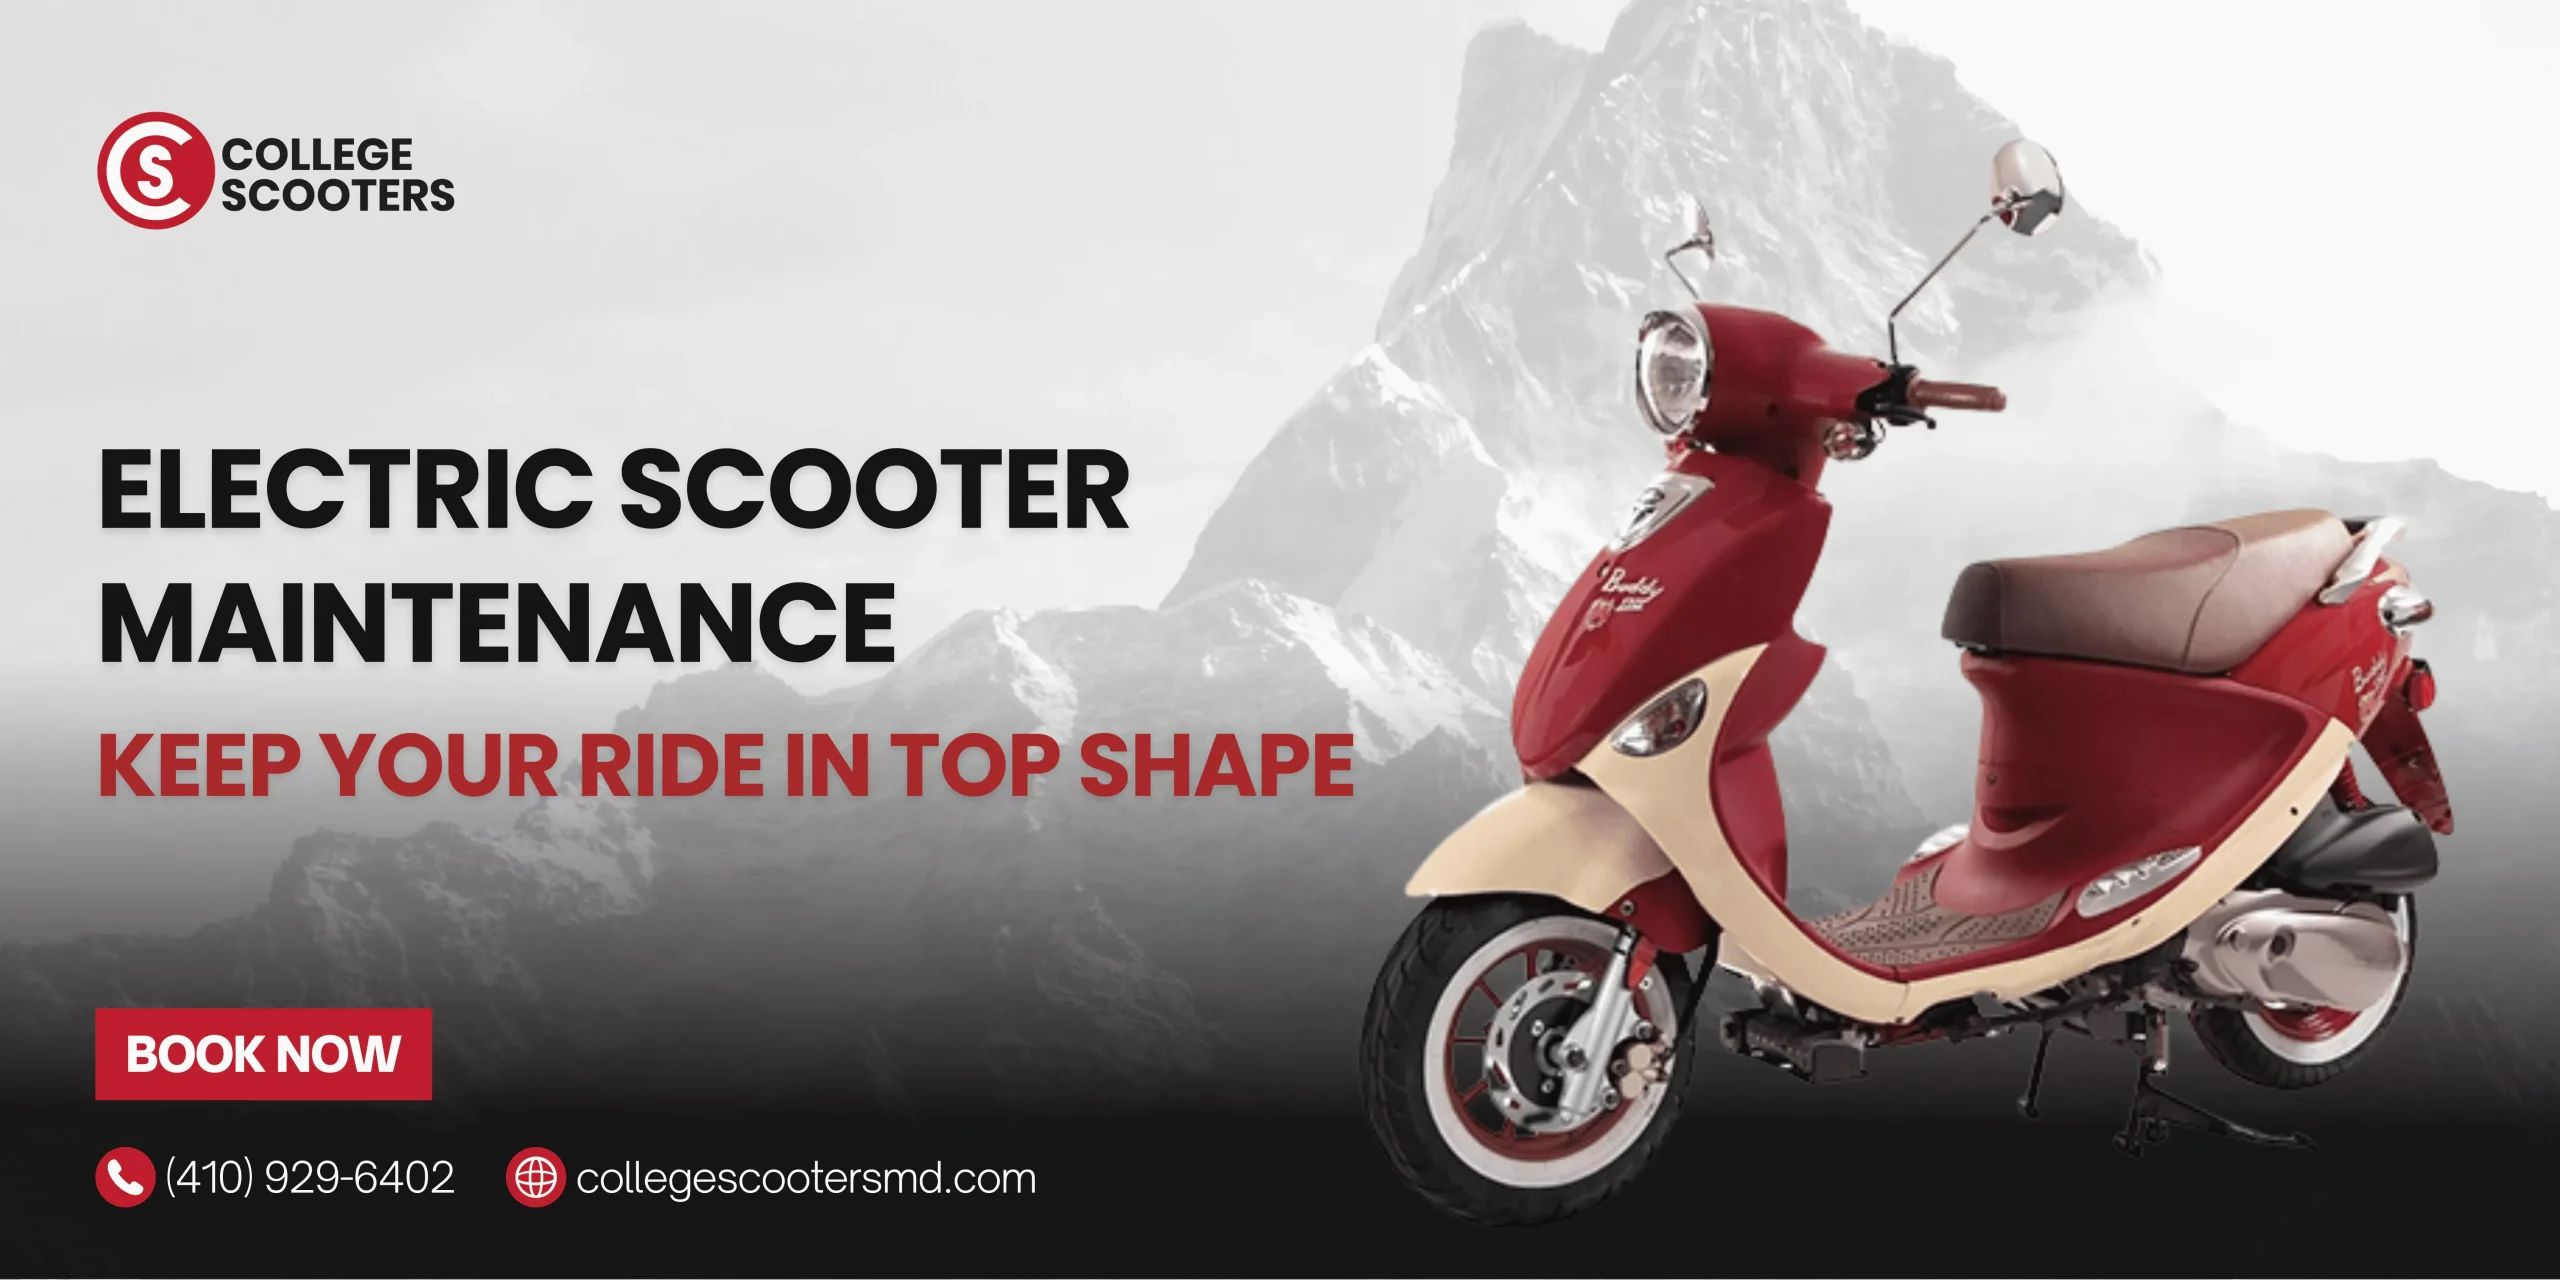 Electric Scooter Maintenance: Keep Your Ride in Top Shape